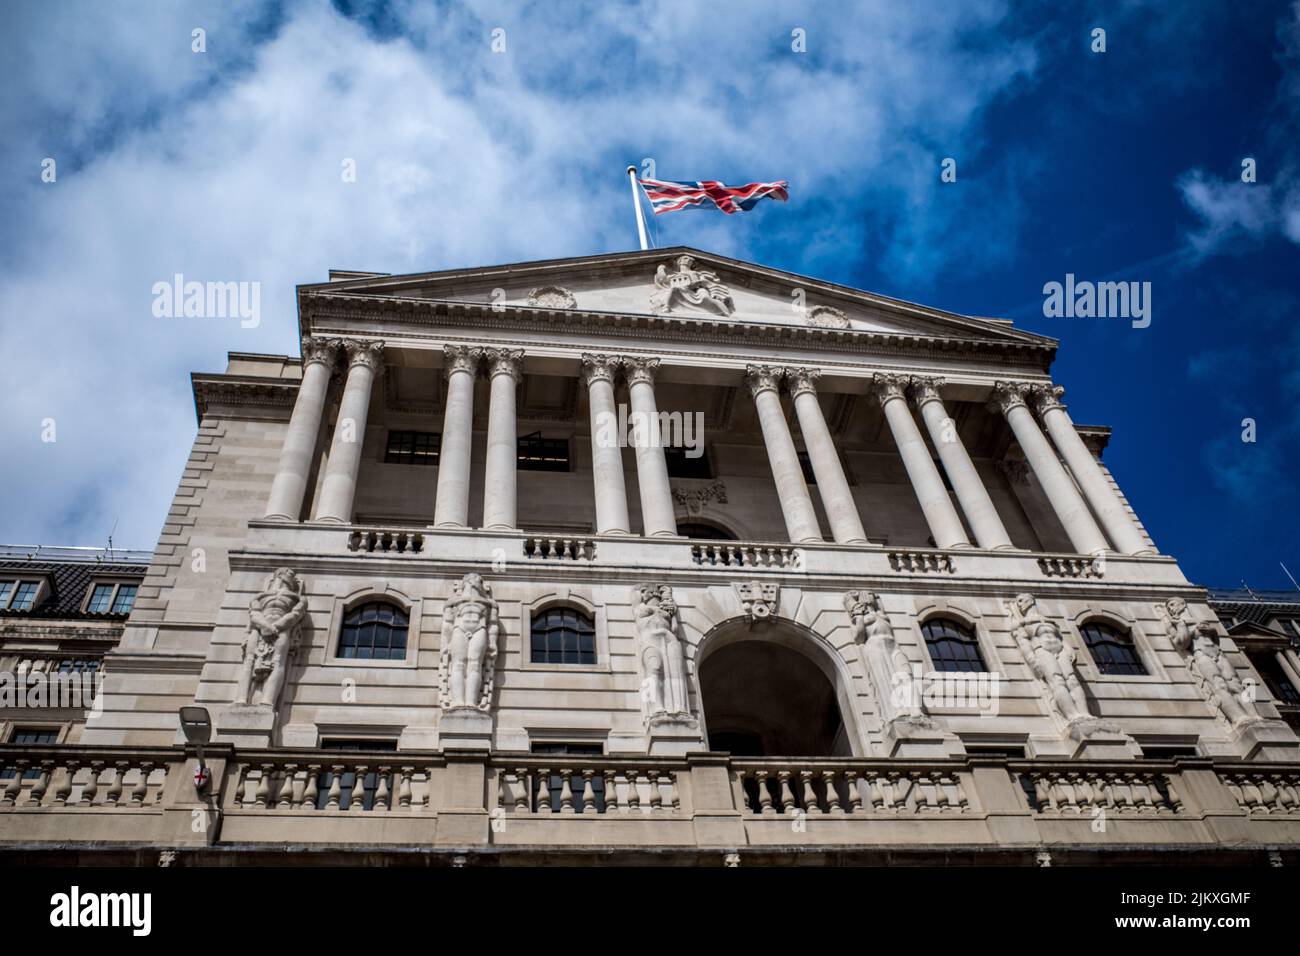 The Bank of England HQ London. The UK Central Bank, the Bank of England BoE HQ Threadneedle St in the City of London Financial District. Stock Photo